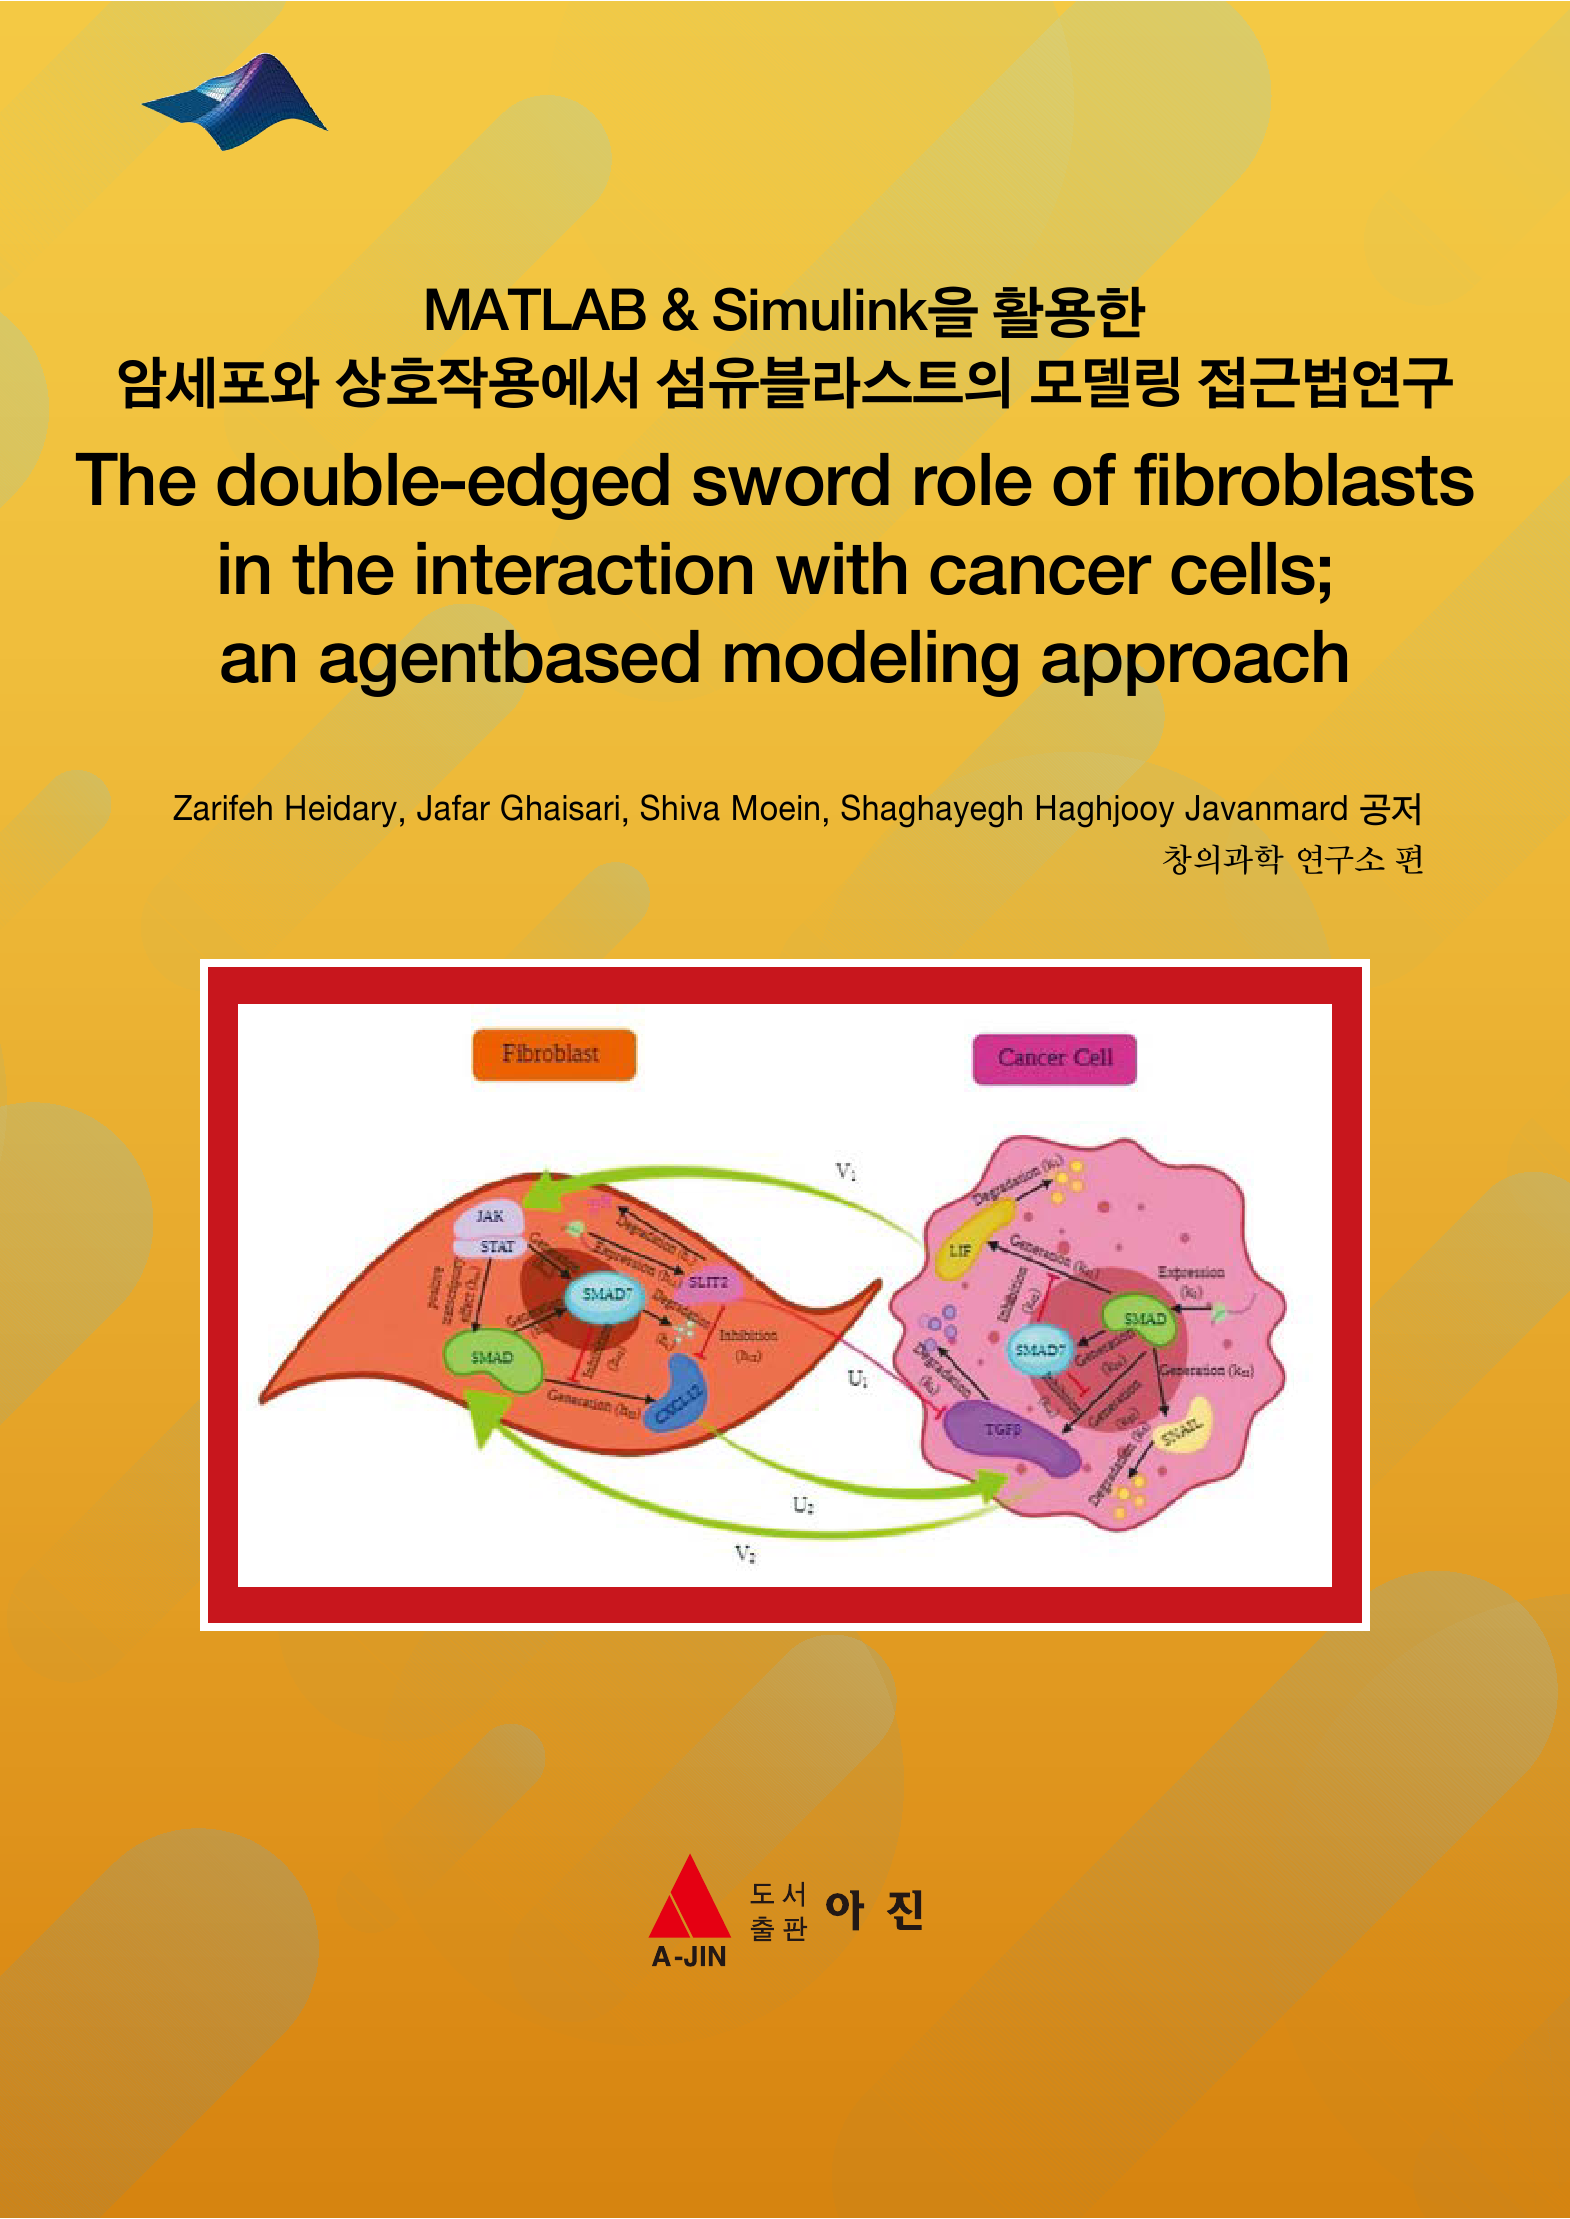 MATLAB & Simulink을 활용한 암세포와 상호작용에서 섬유블라스트의 모델링 접근법연구(The double-edged sword role of fibroblasts in the interaction with cancer cells an agentbased modeling approach)